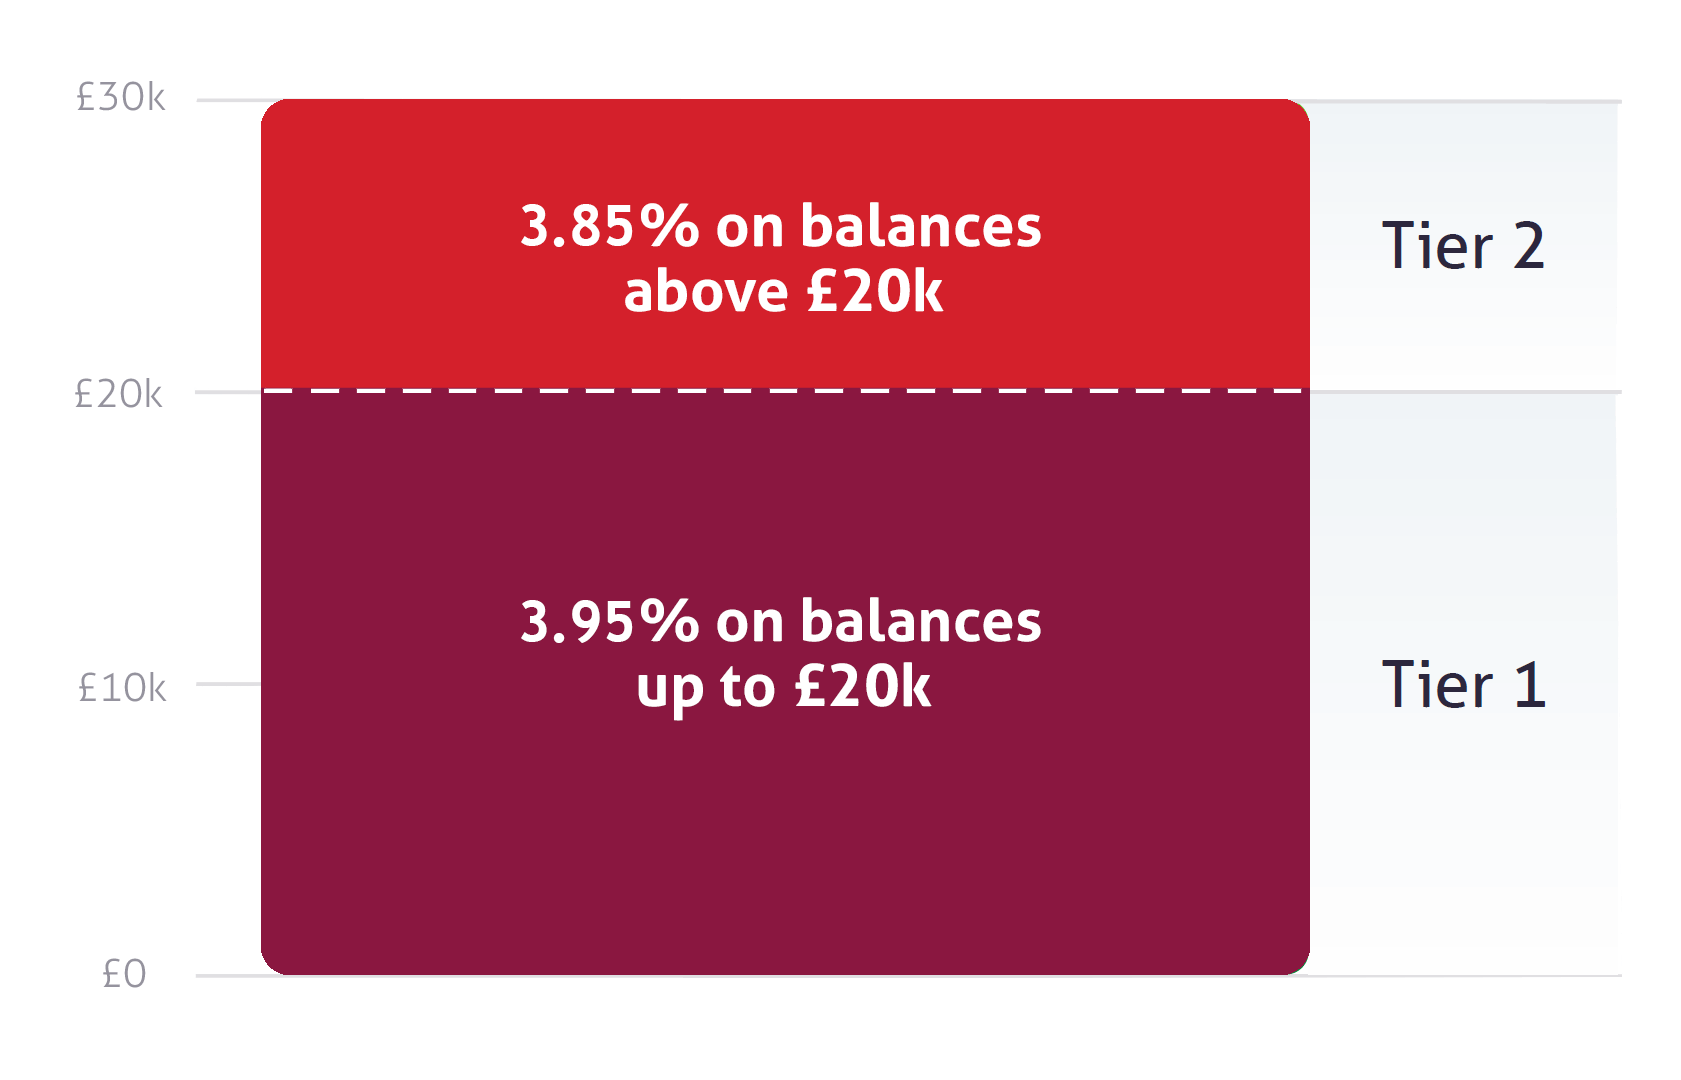 Image of graph with scale on the left hand side with £30k at the top down through £20k and £10k to £0. There is light red shading at the top with a label that says tier 2 and 3.85% on balances above £20k and dark red shading at the bottom with a label that says tier 1 and 3.95% on balances up to £20k.